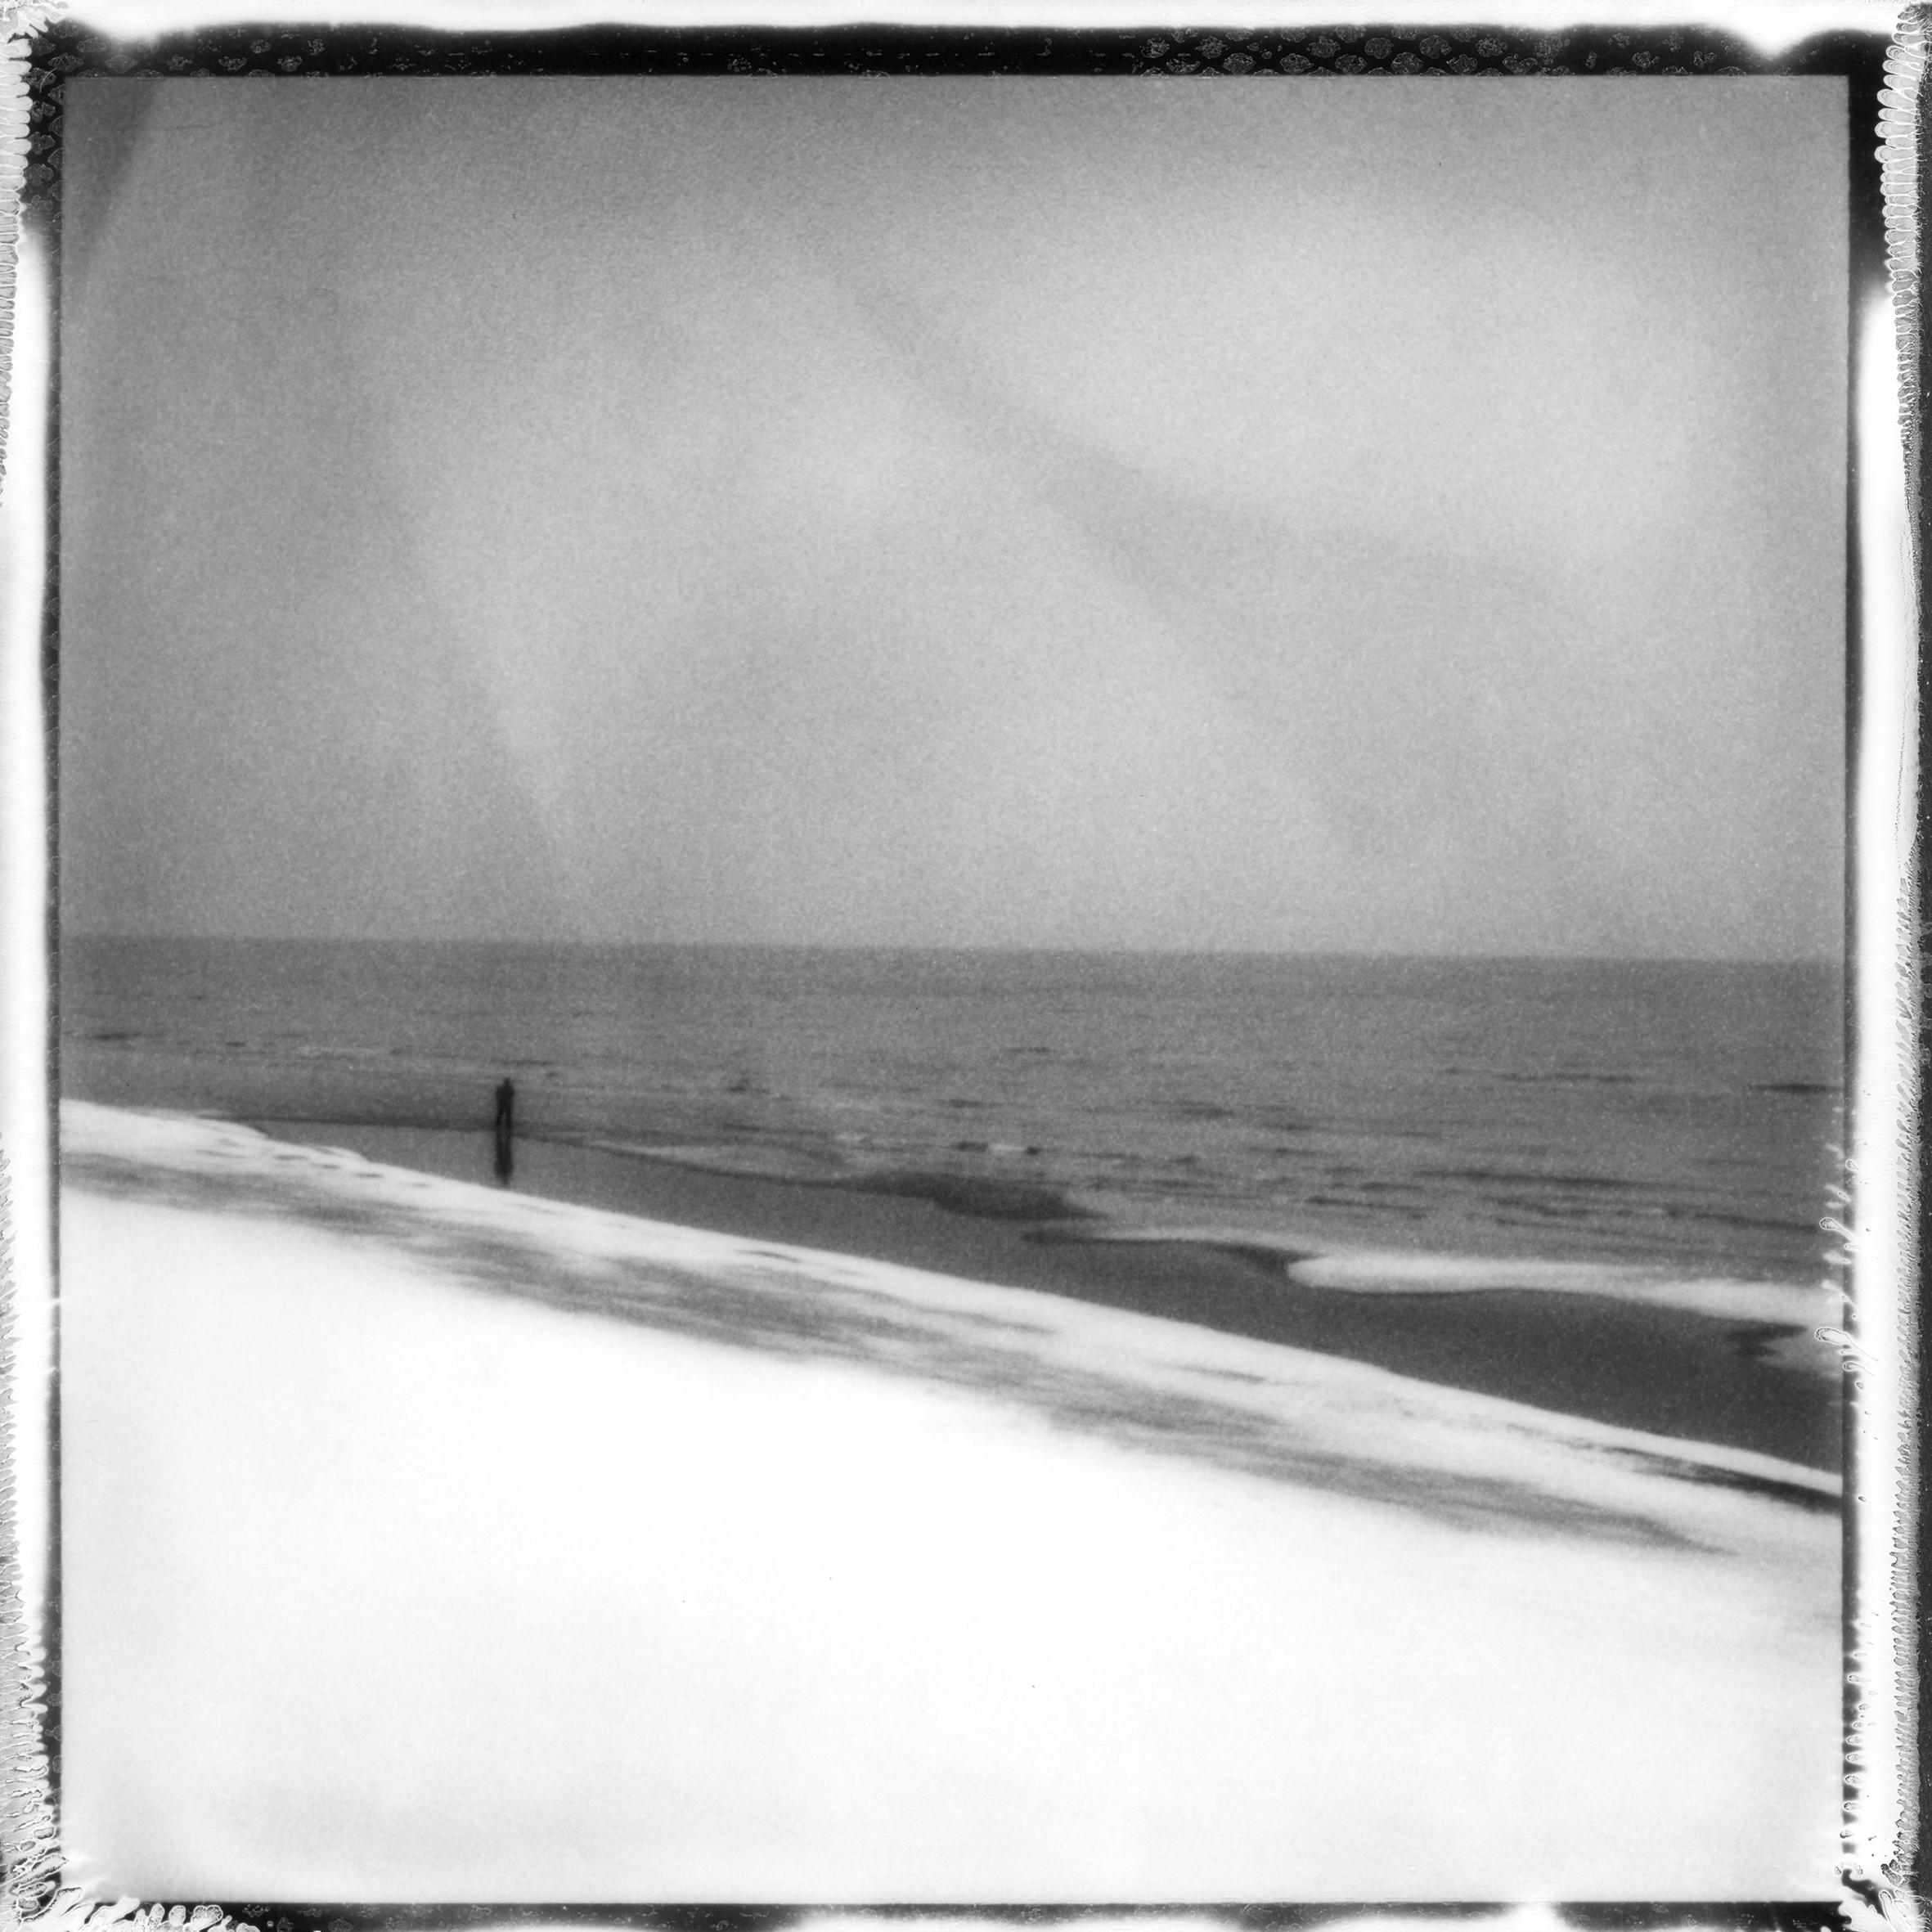 Ugne Pouwell Black and White Photograph - 'Frozen beach #6' - black and white analogue landscape photography